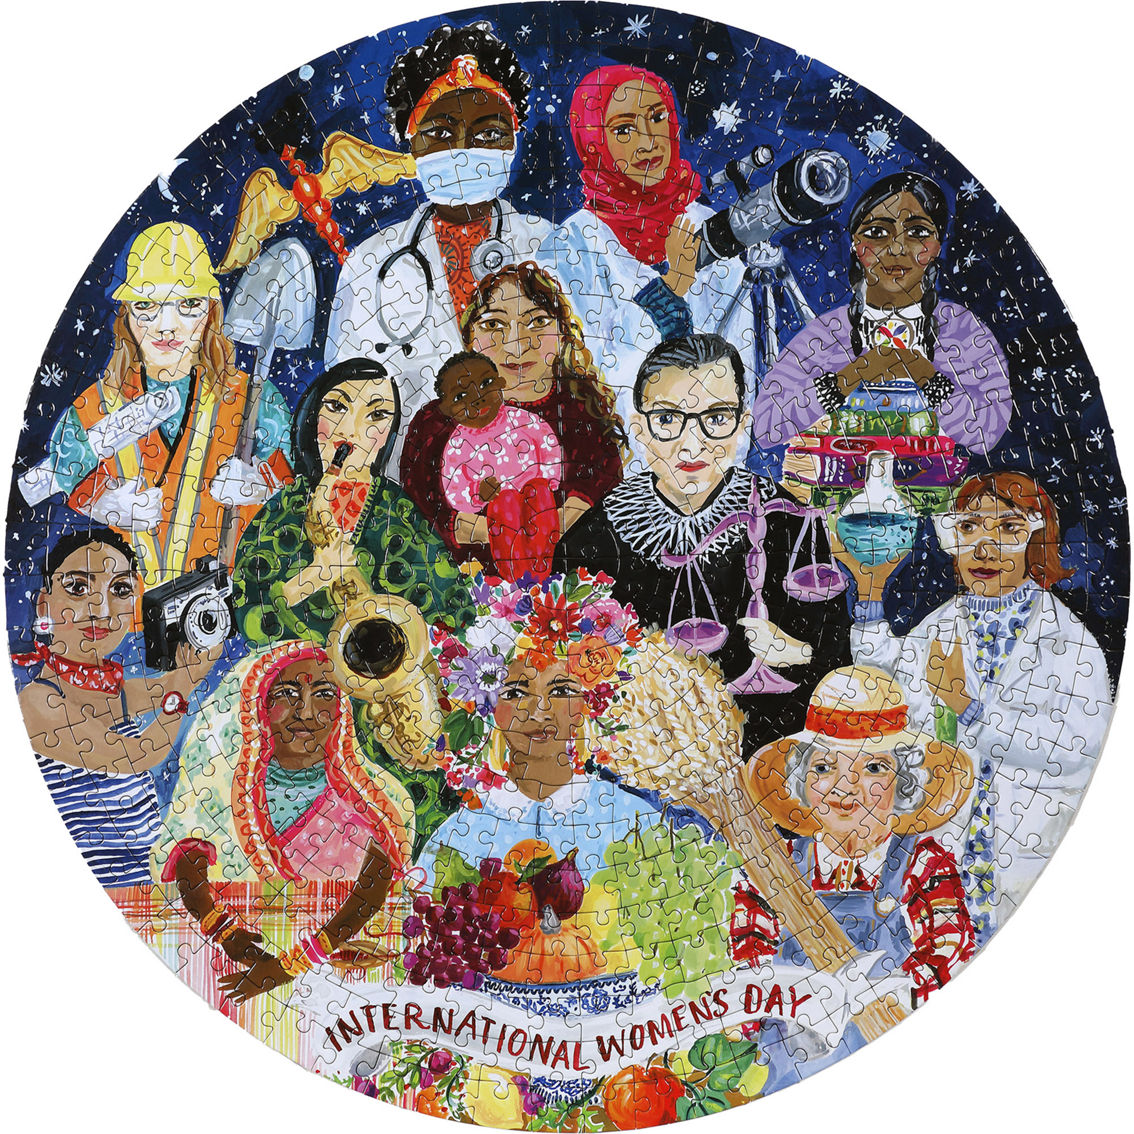 eeBoo Piece and Love International Women's Day 500 Piece Round Jigsaw Puzzle - Image 4 of 4